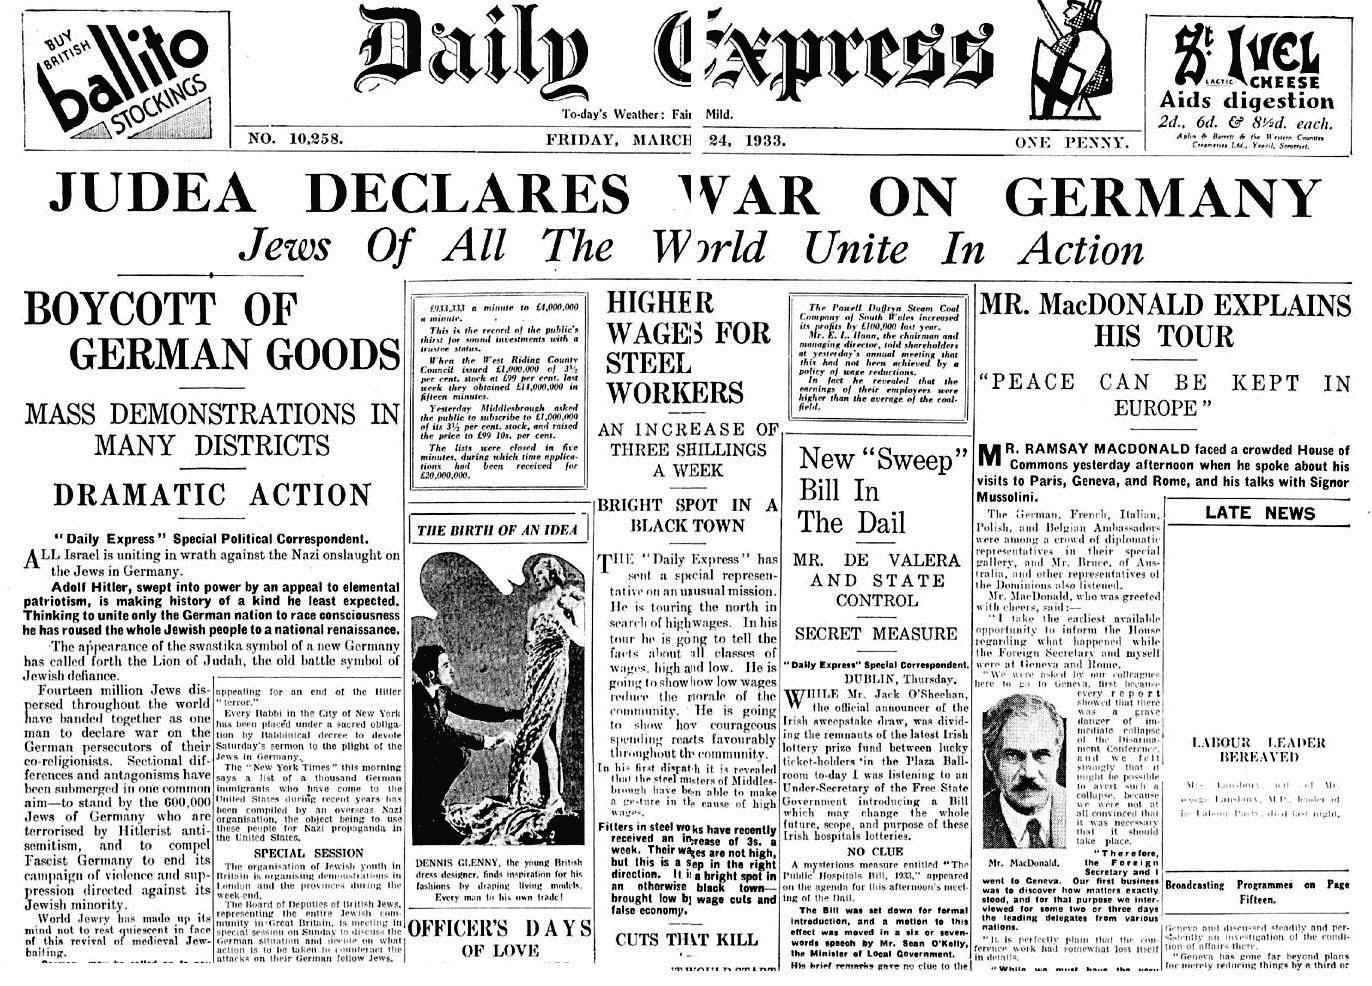 The Israeli people around the whole world declare economic and financial war against Germany. Fourteen million Jews stand together as one man, to declare war against Germany. The Jewish wholesaler will forsake his firm, the banker his stock exchange, the merchant his commerce, and the pauper his pitiful shed in order to join together in a holy war against Hitler’s people.’ Statement issued by organised Jewry, as reported above by the 'Daily Express' on 24 March 1933.